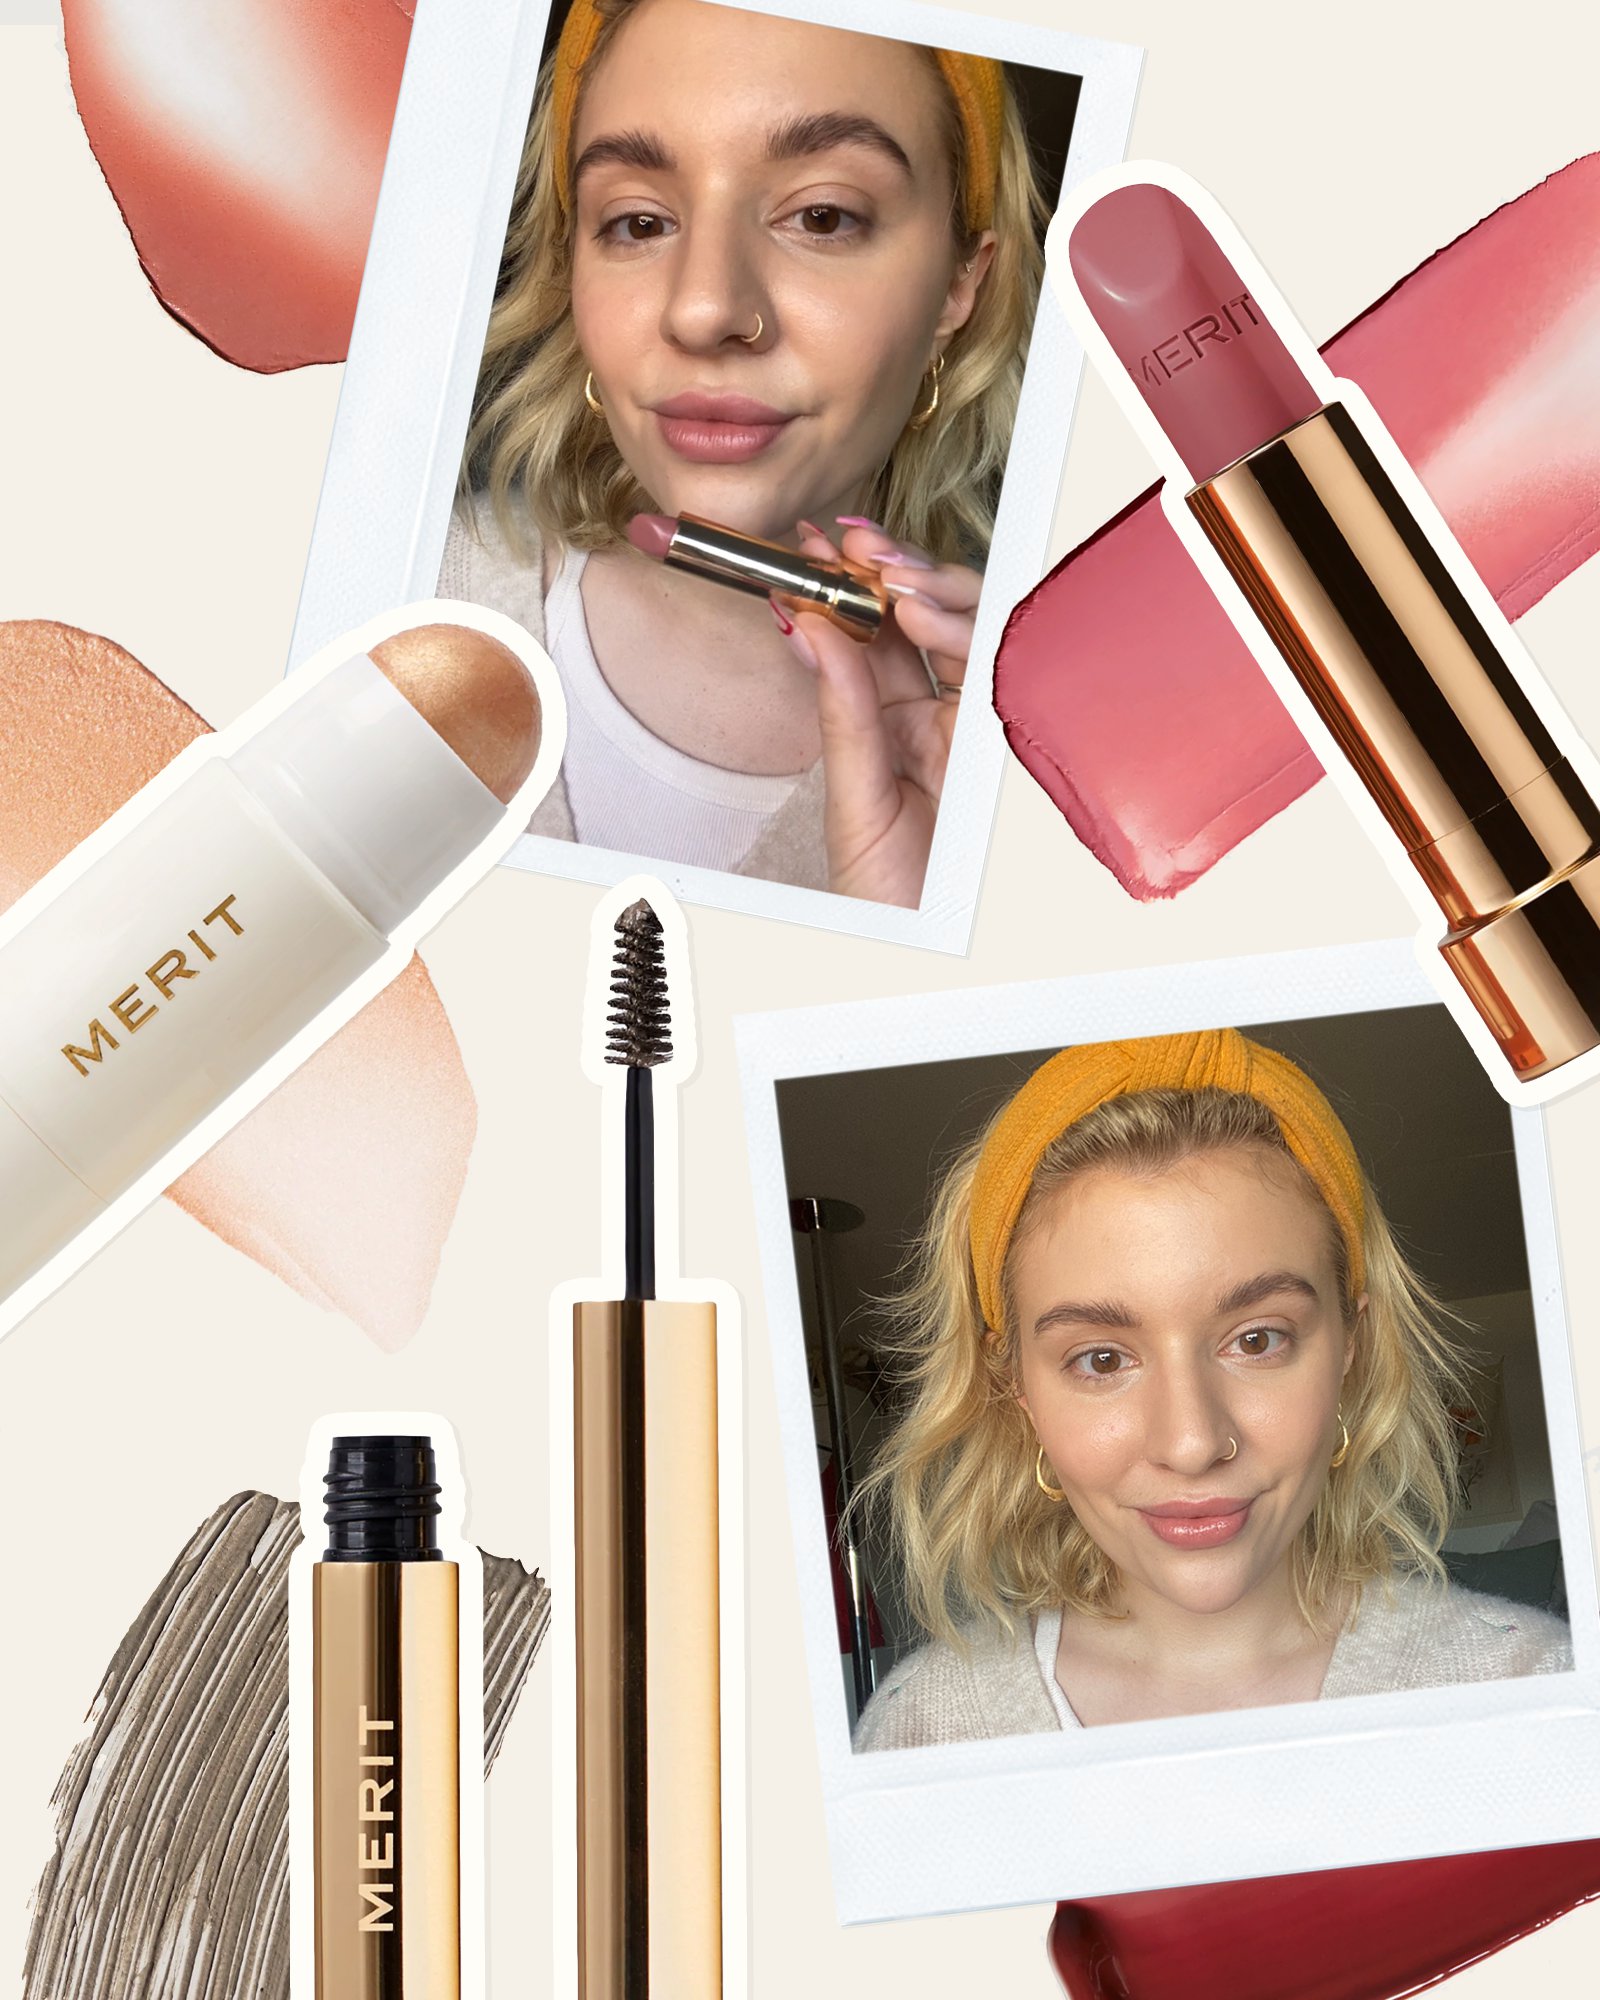 Everything You Need To Know About Merit Beauty